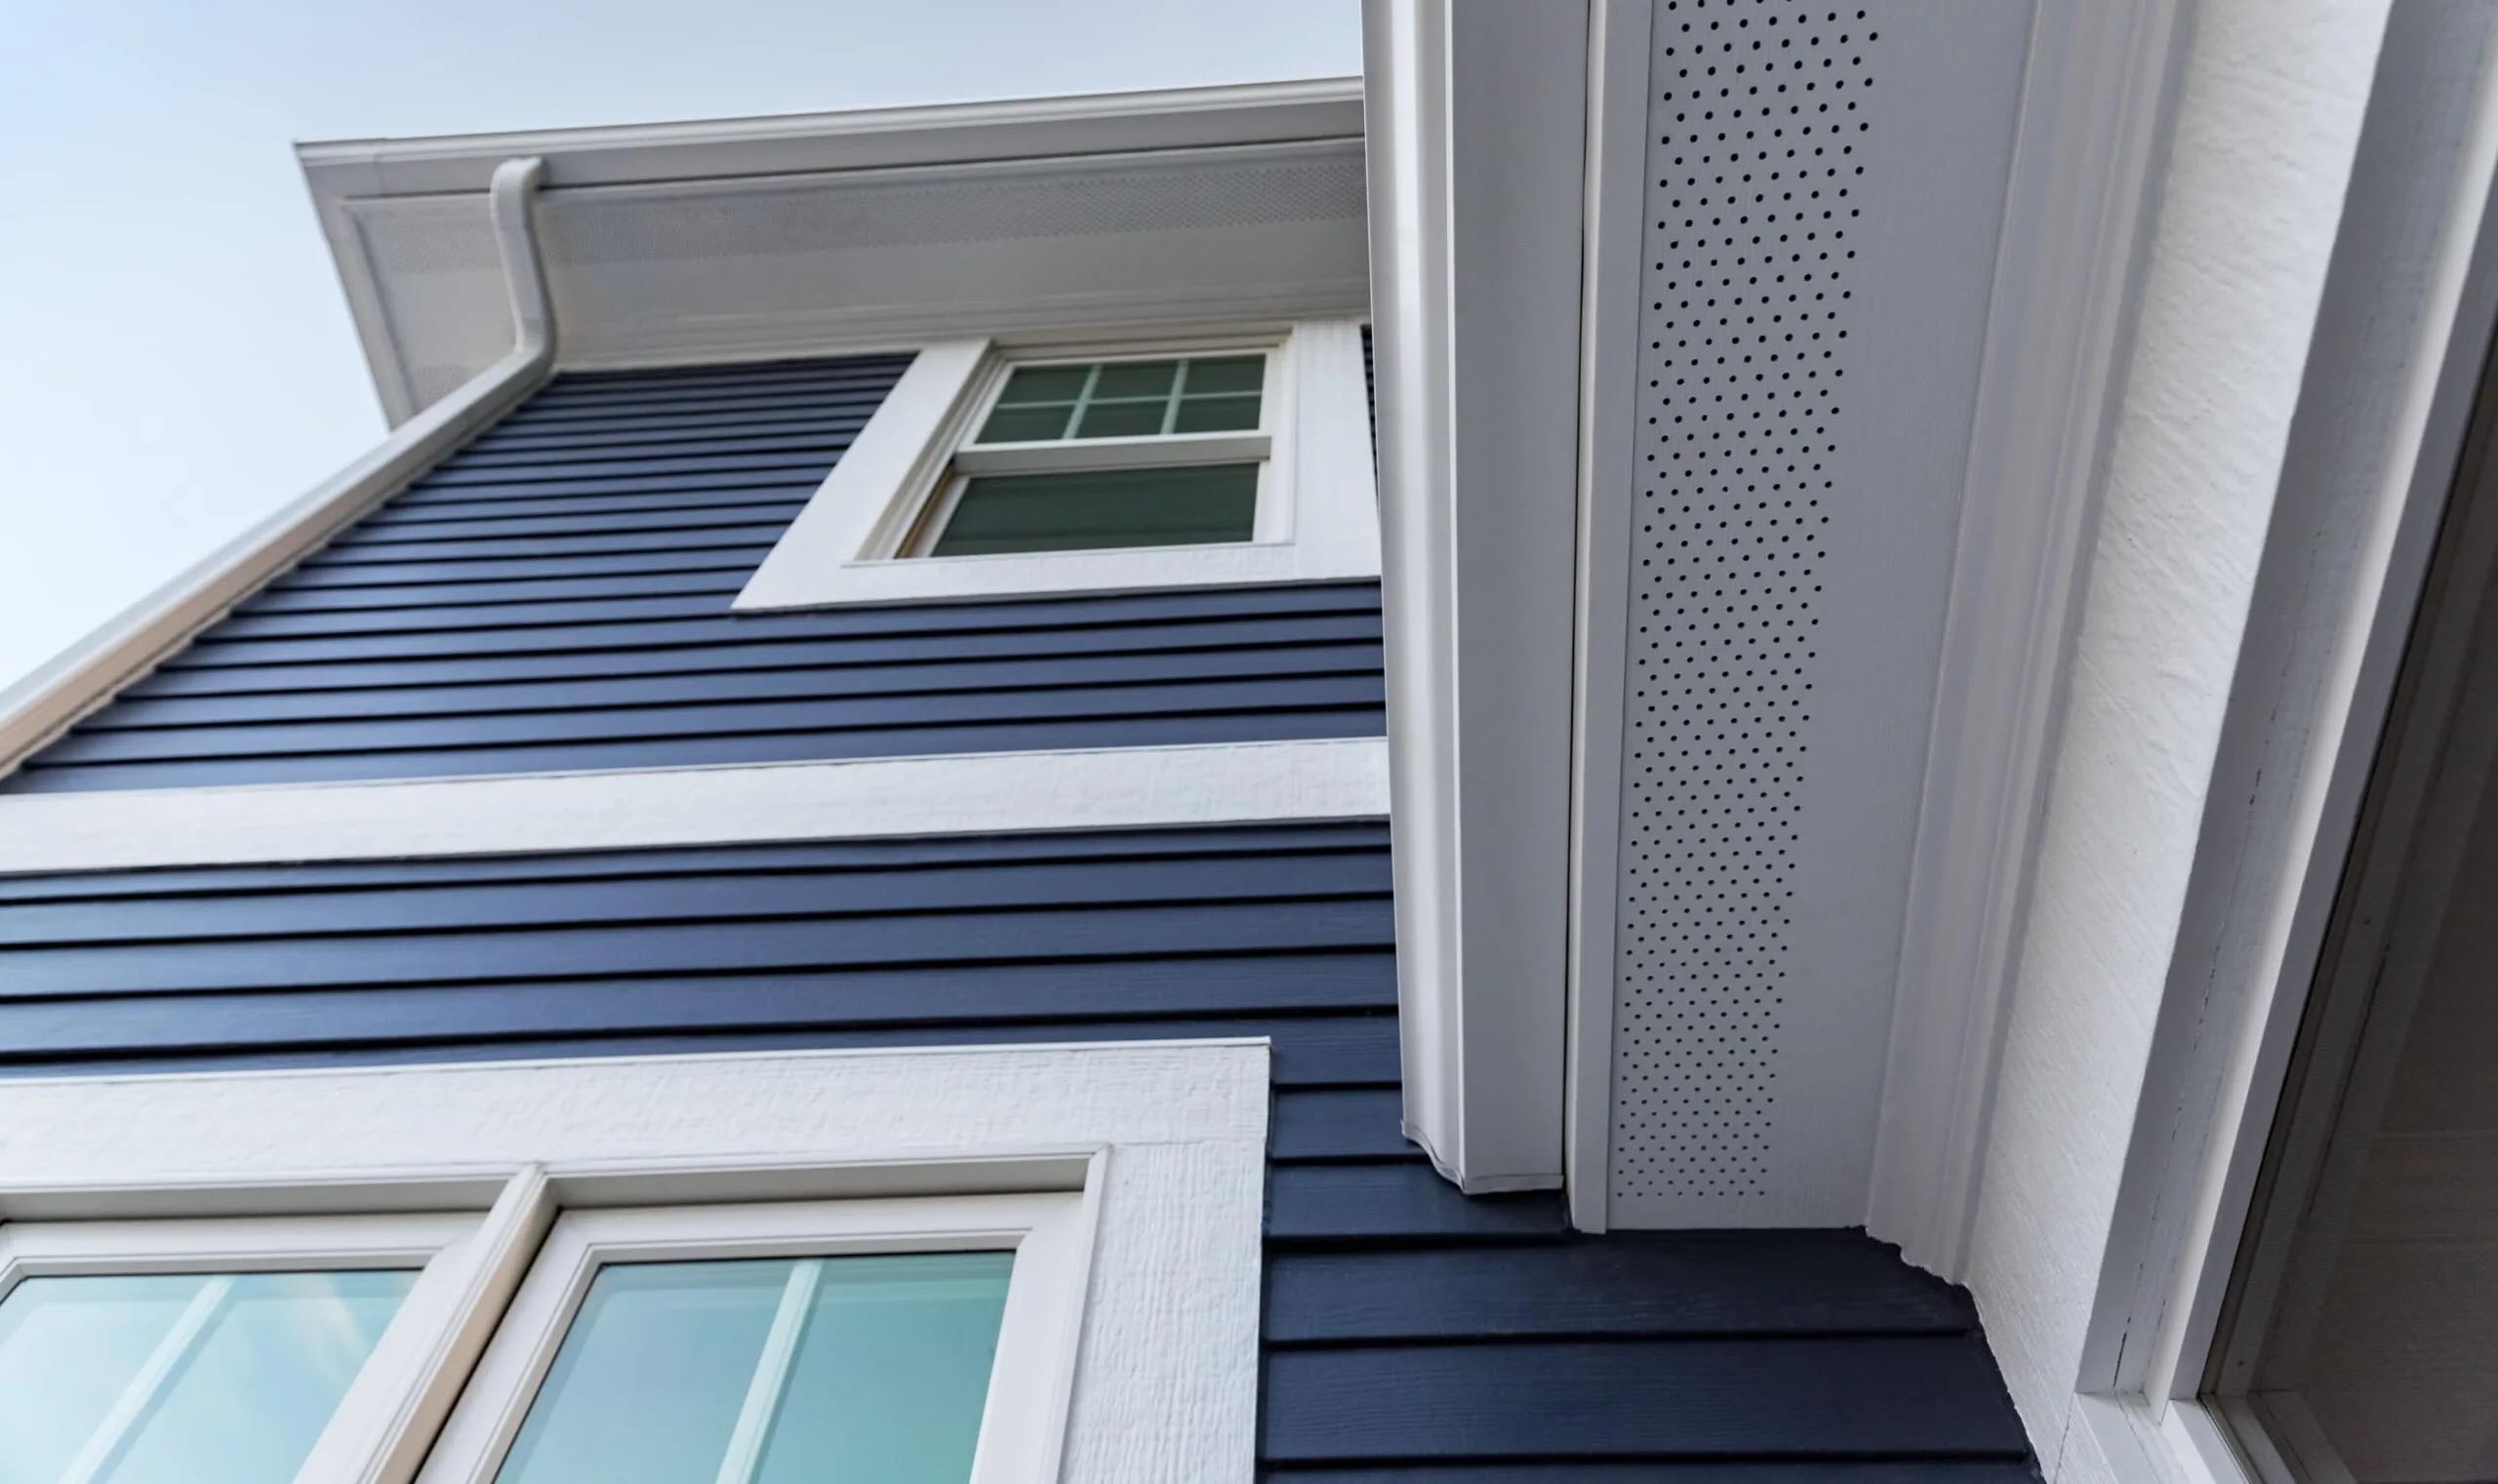 How To Measure Eaves Height